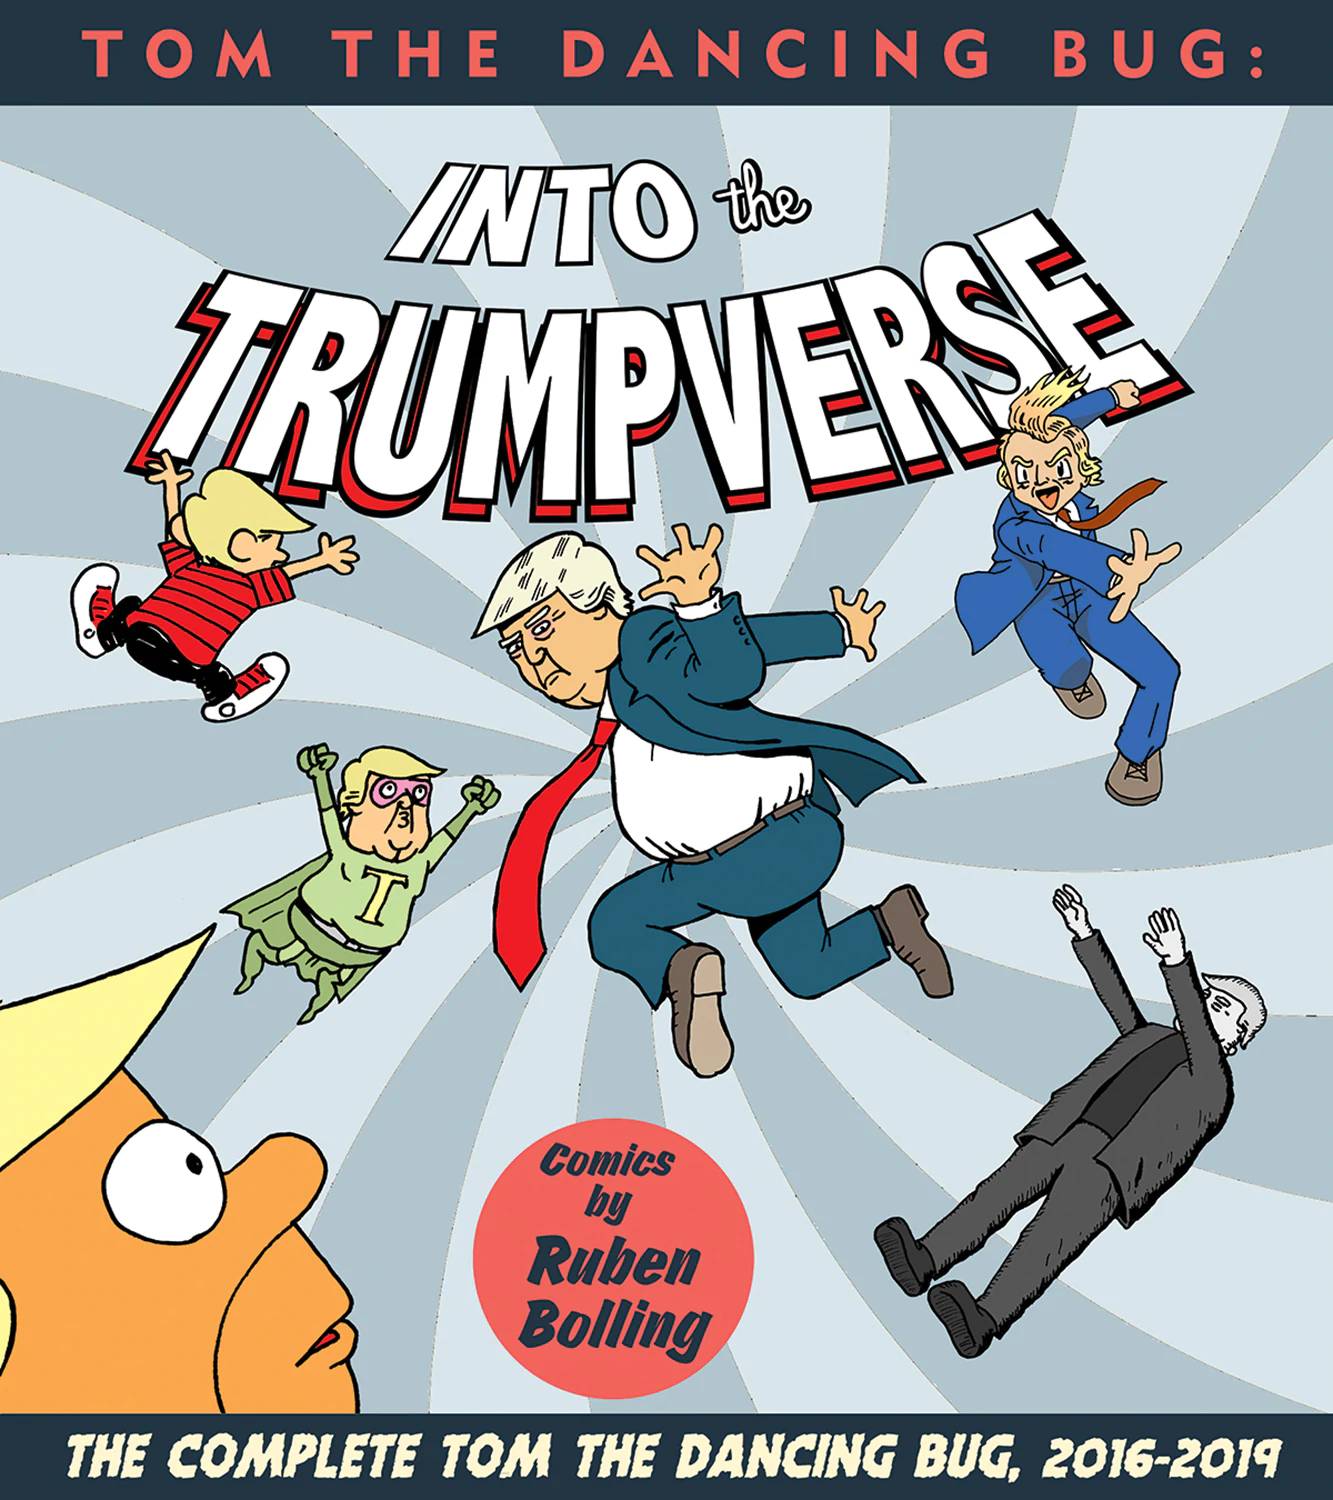 TOM DANCING BUG INTO THE TRUMPVERSE GN TP NEW PTG